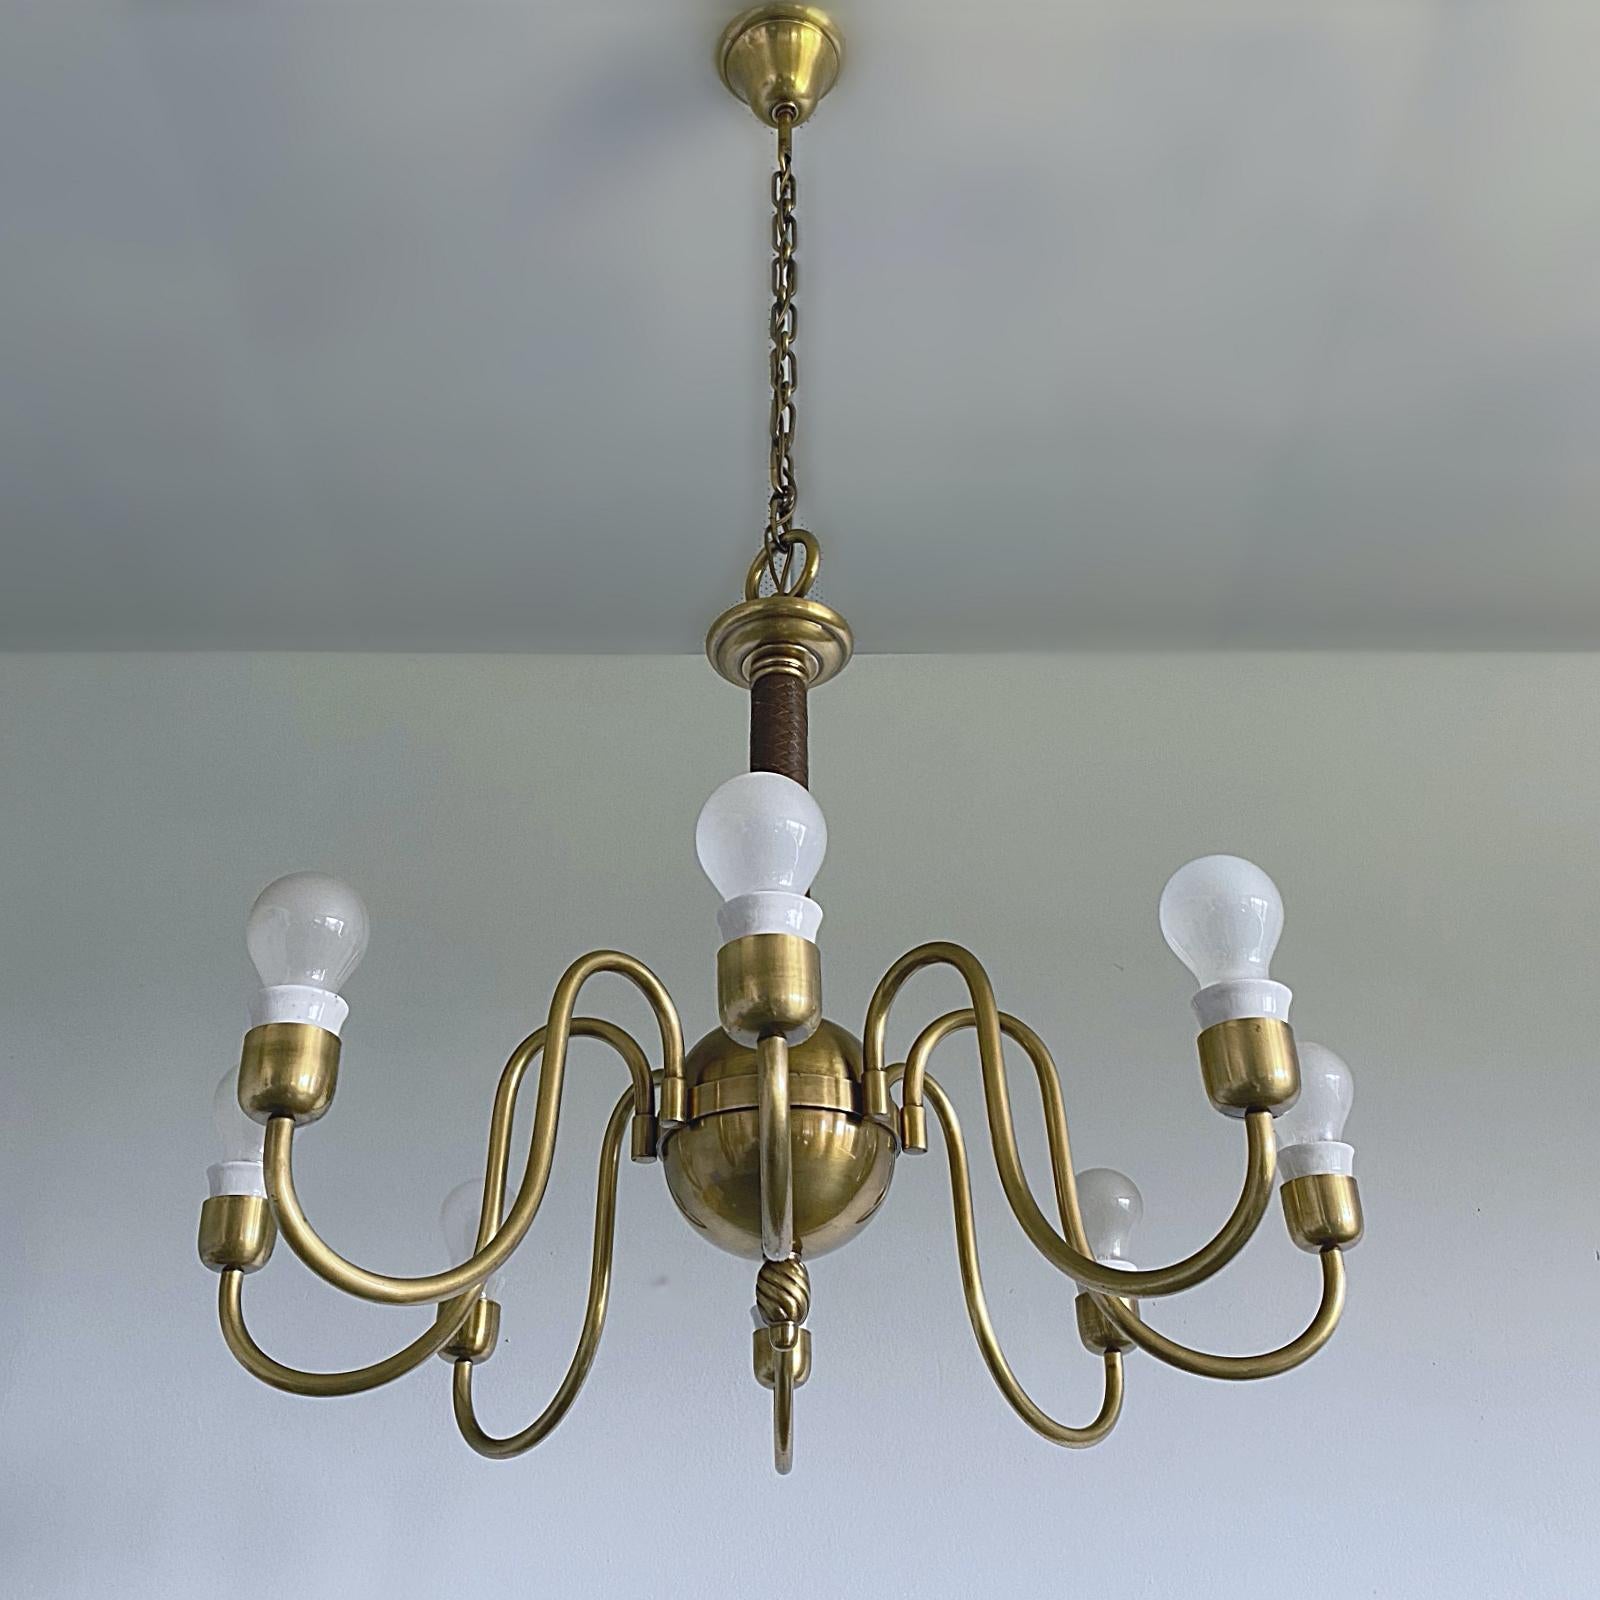 Very rare and elegant Viennese Modern Age brass chandelier designed by Professor Hugo Gorge and manufactured by Melzer & Neuhardt in Vienna, Austria. Prof. Hugo Gorge was one of the founders of Viennese Modern, together with Adolf Loos, Josef Frank,